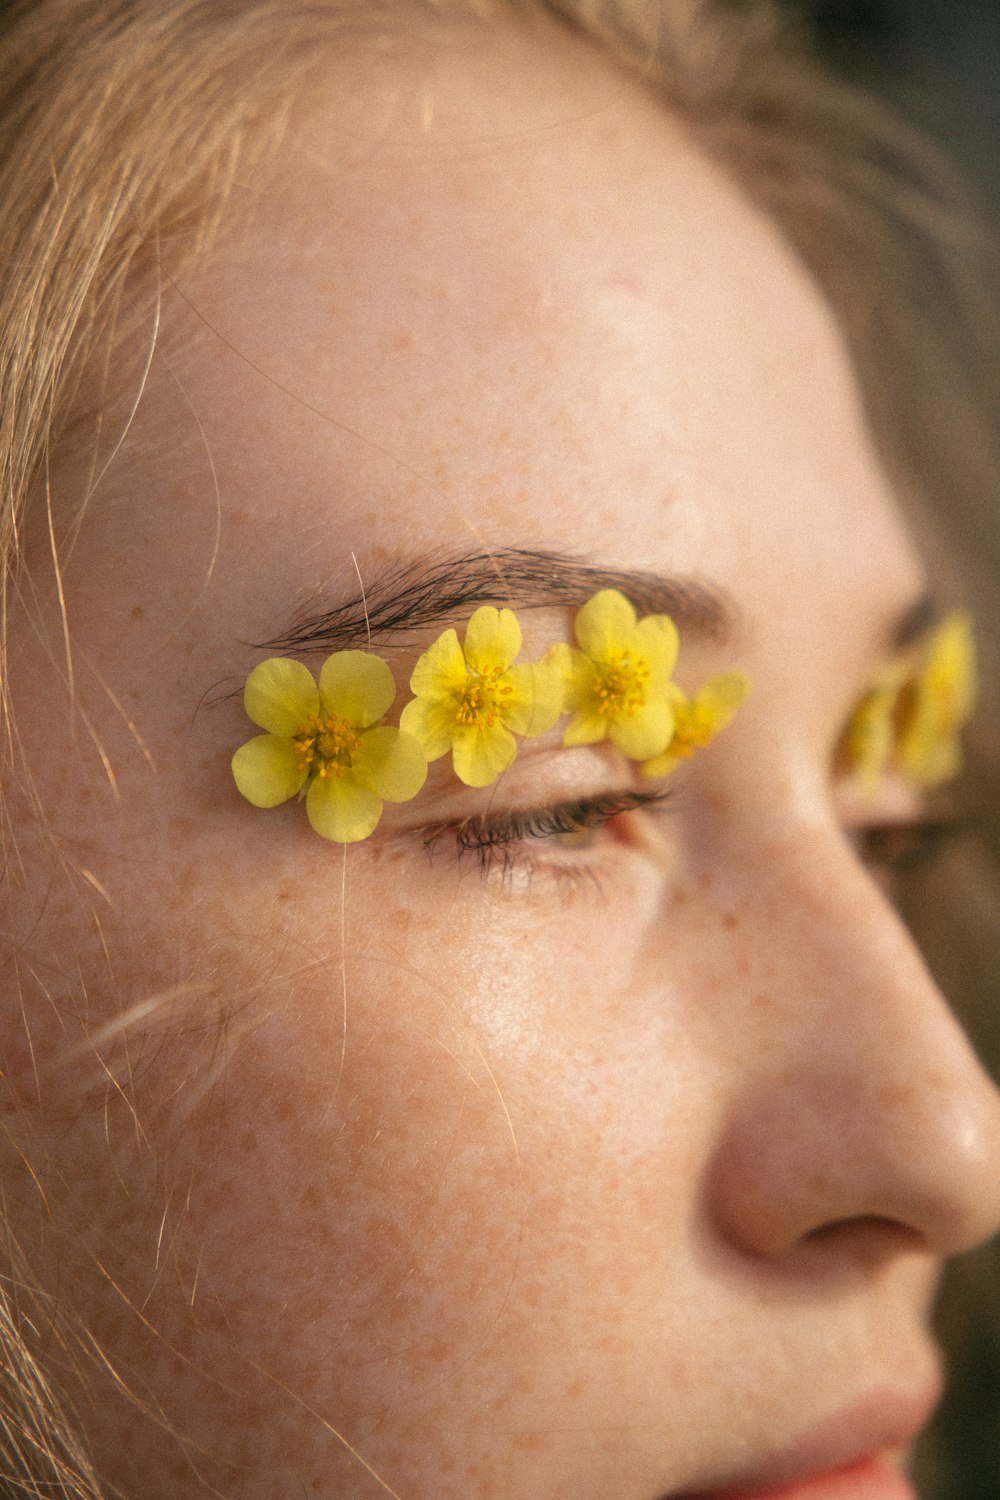 yellow flower on persons ear